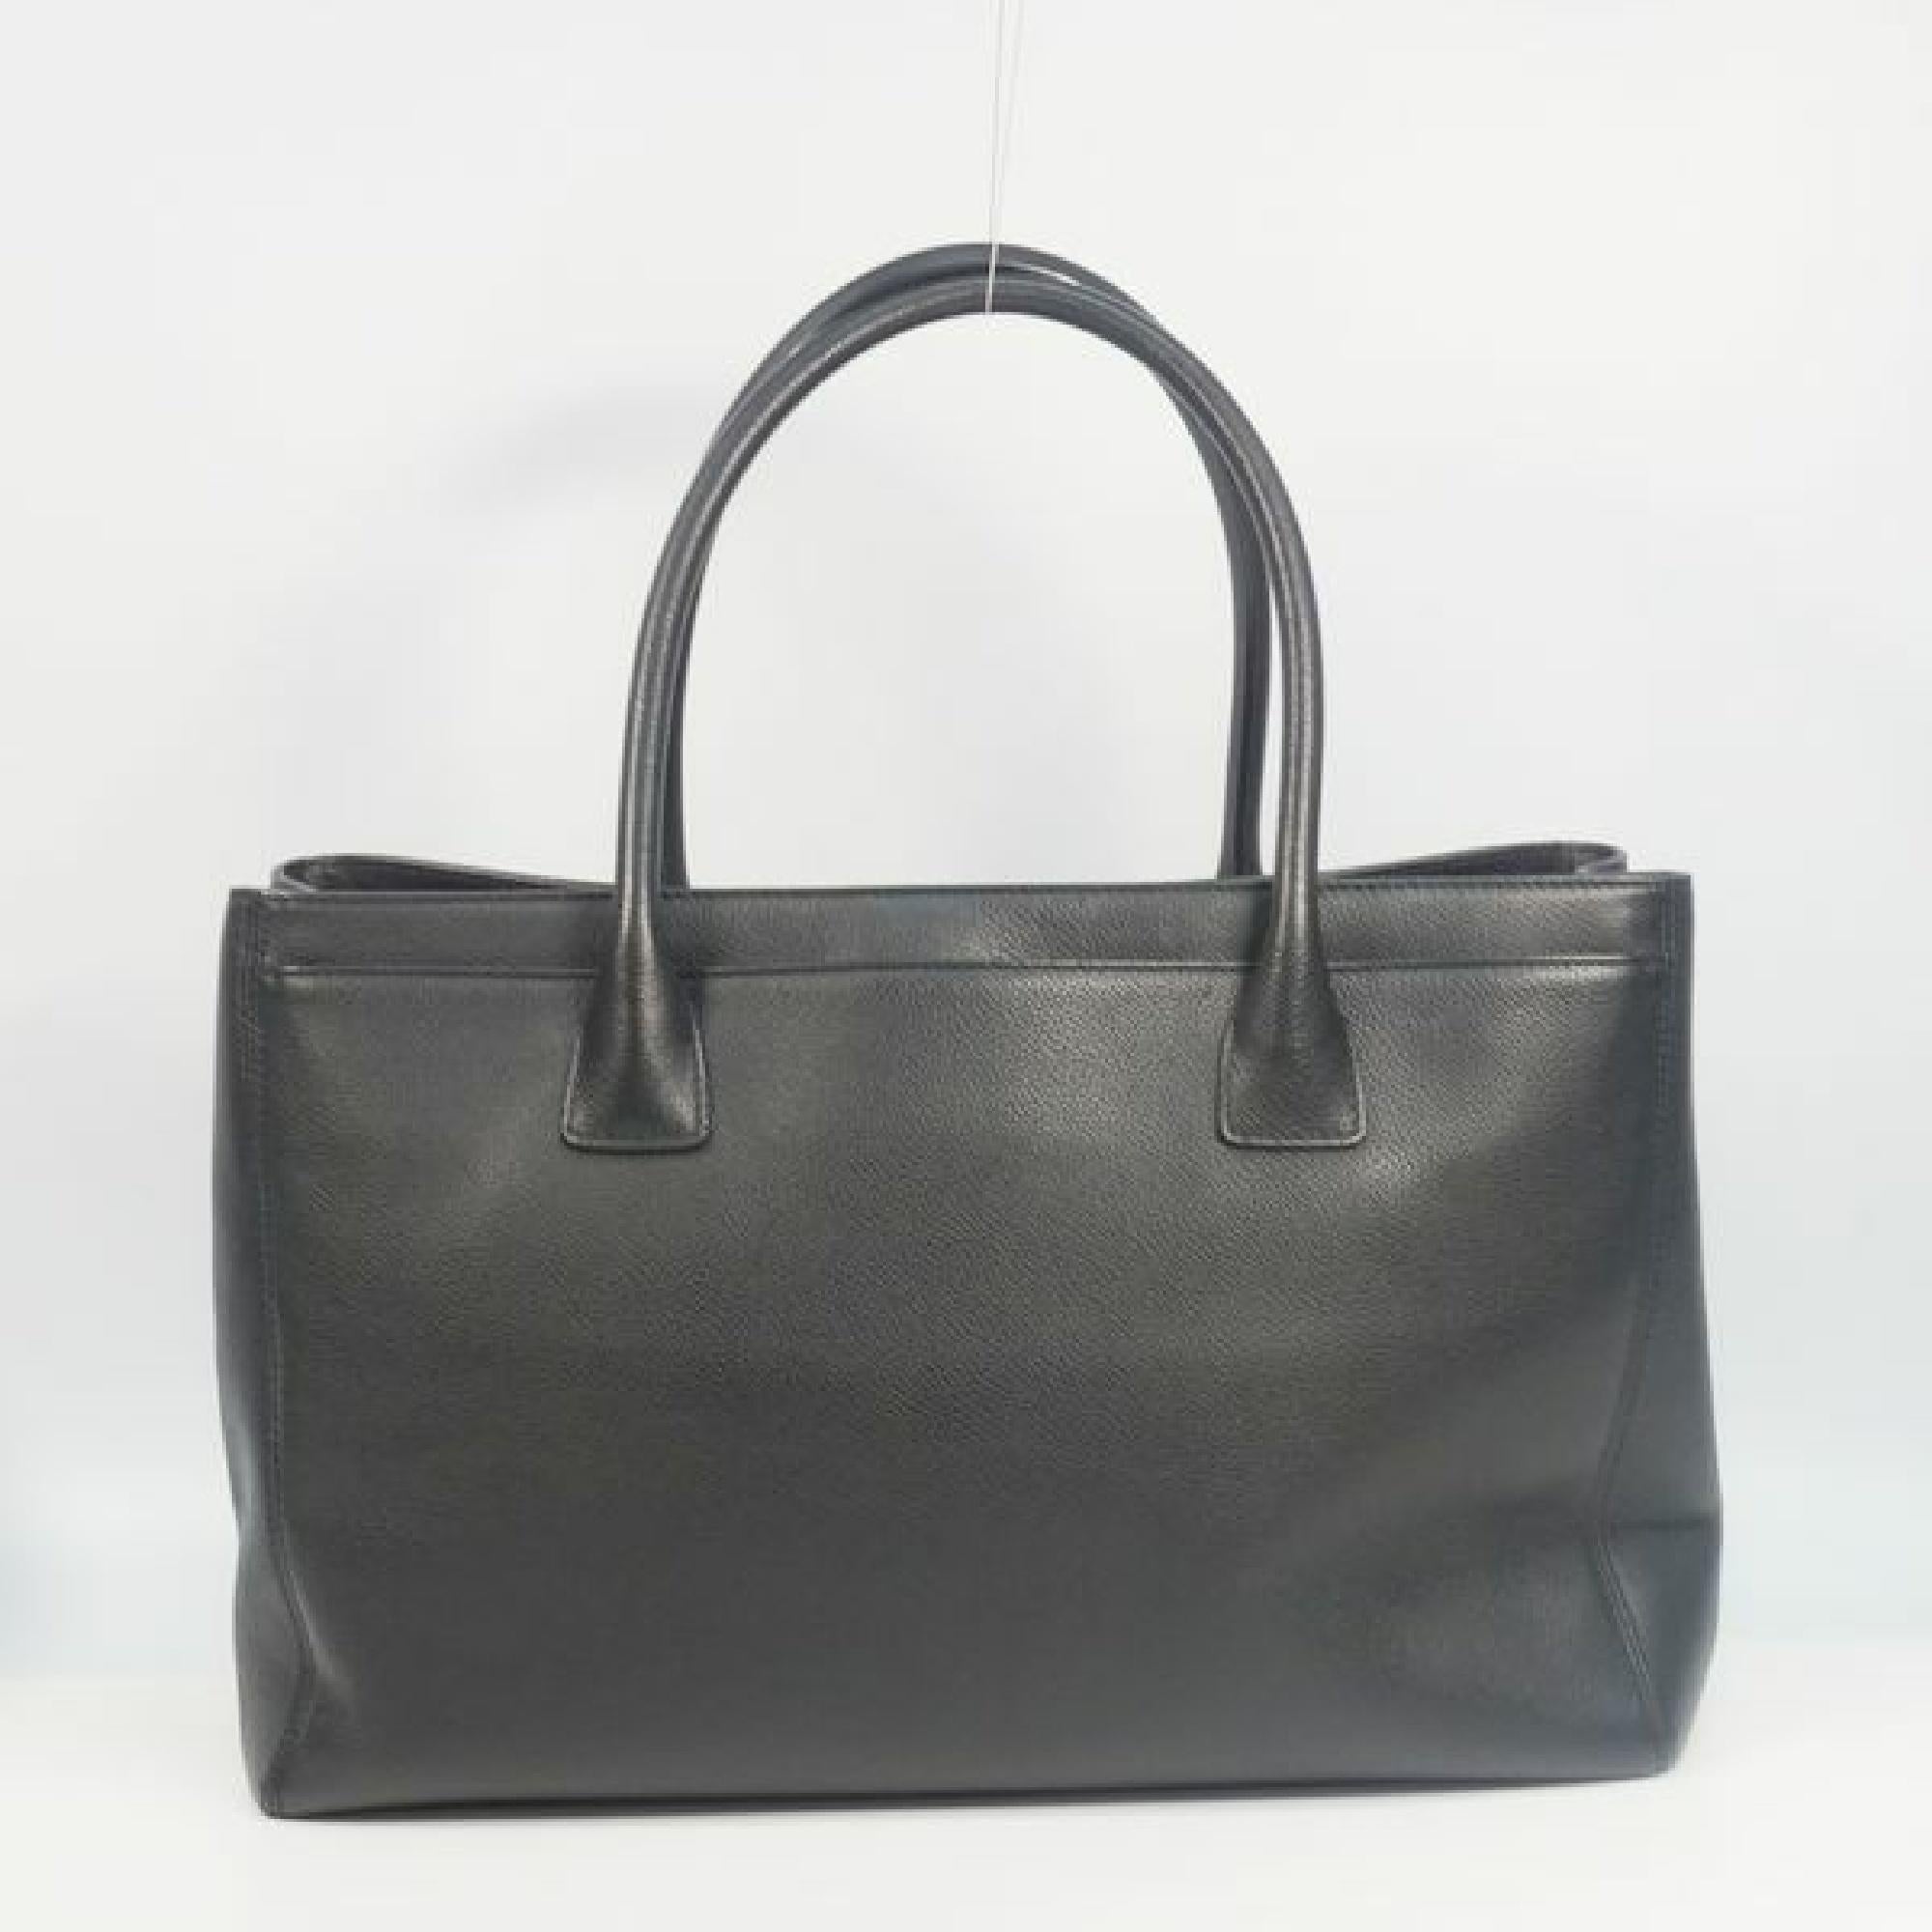 black tote bag with silver hardware